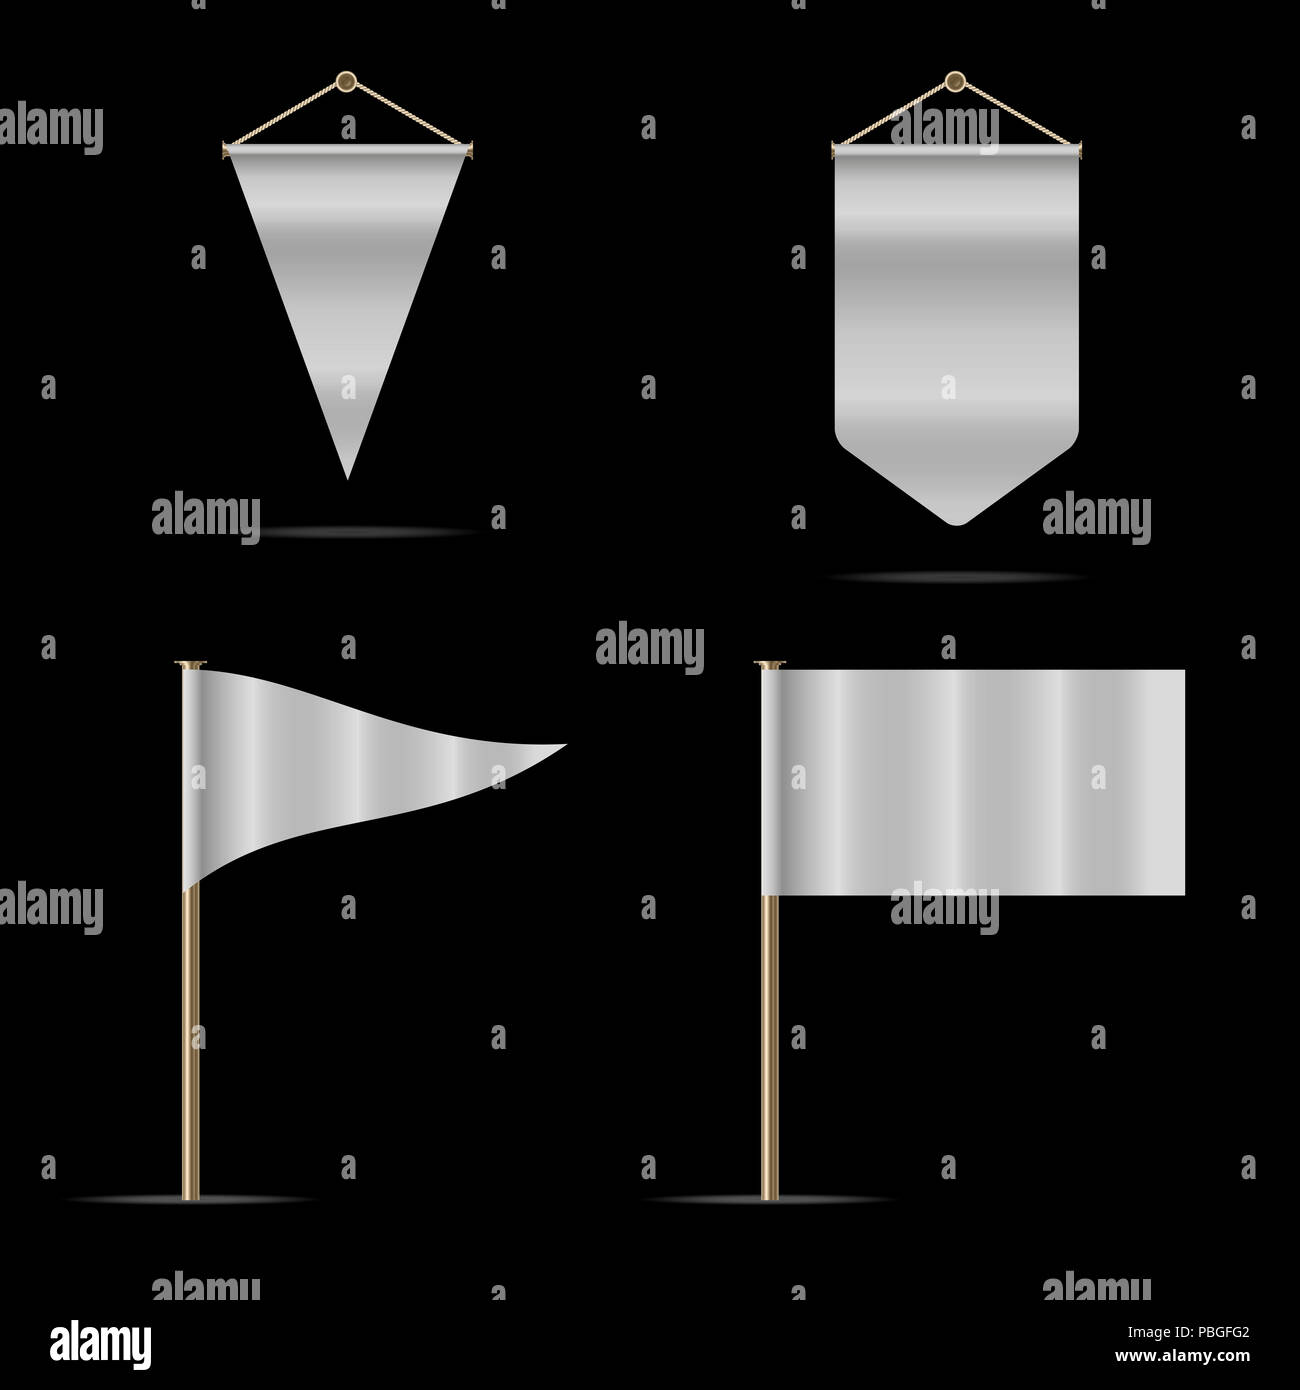 Blank White Flags and Pennants of Different Shapes. Design Elements Set for  Web Design, Banners, Presentations or Business Cards, Flyers, Brochures an  Stock Photo - Alamy